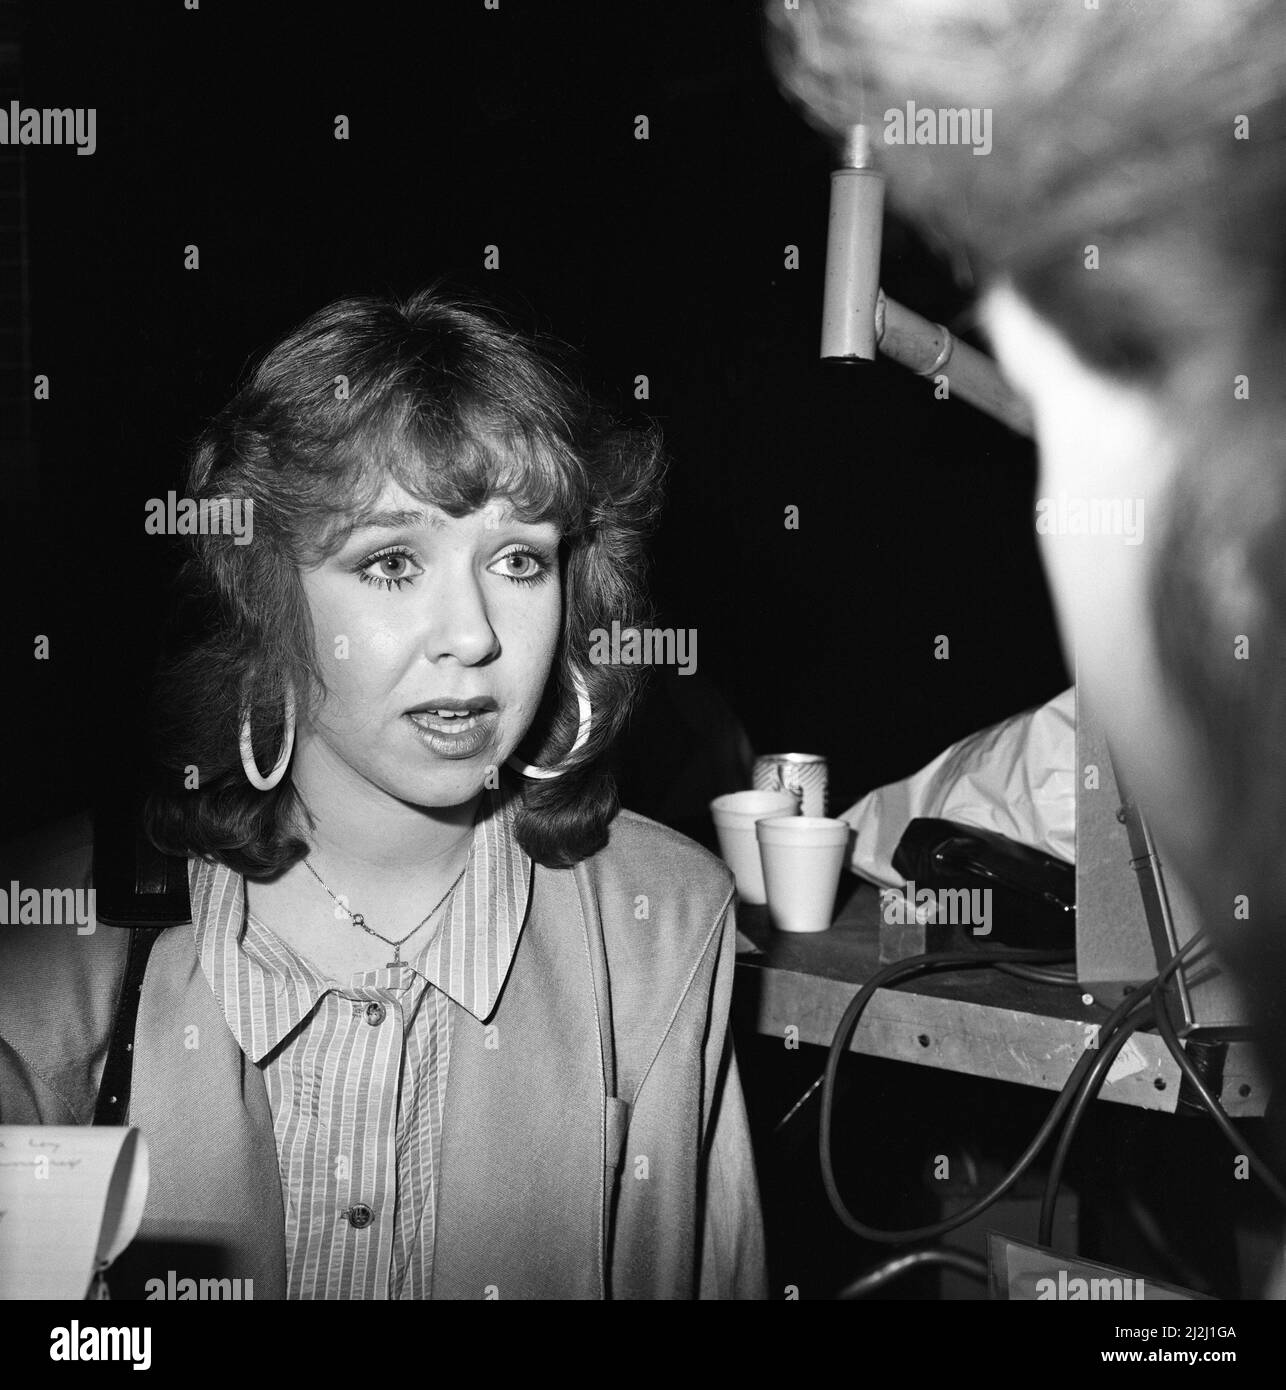 Past and present members of the cast of the BBC children's television series Grange Hill celebrate the programme's 10th anniversary at the BBC in Borehamwood, Hertfordshire. Pictured, Susan Tully. 3rd February 1987. Stock Photo